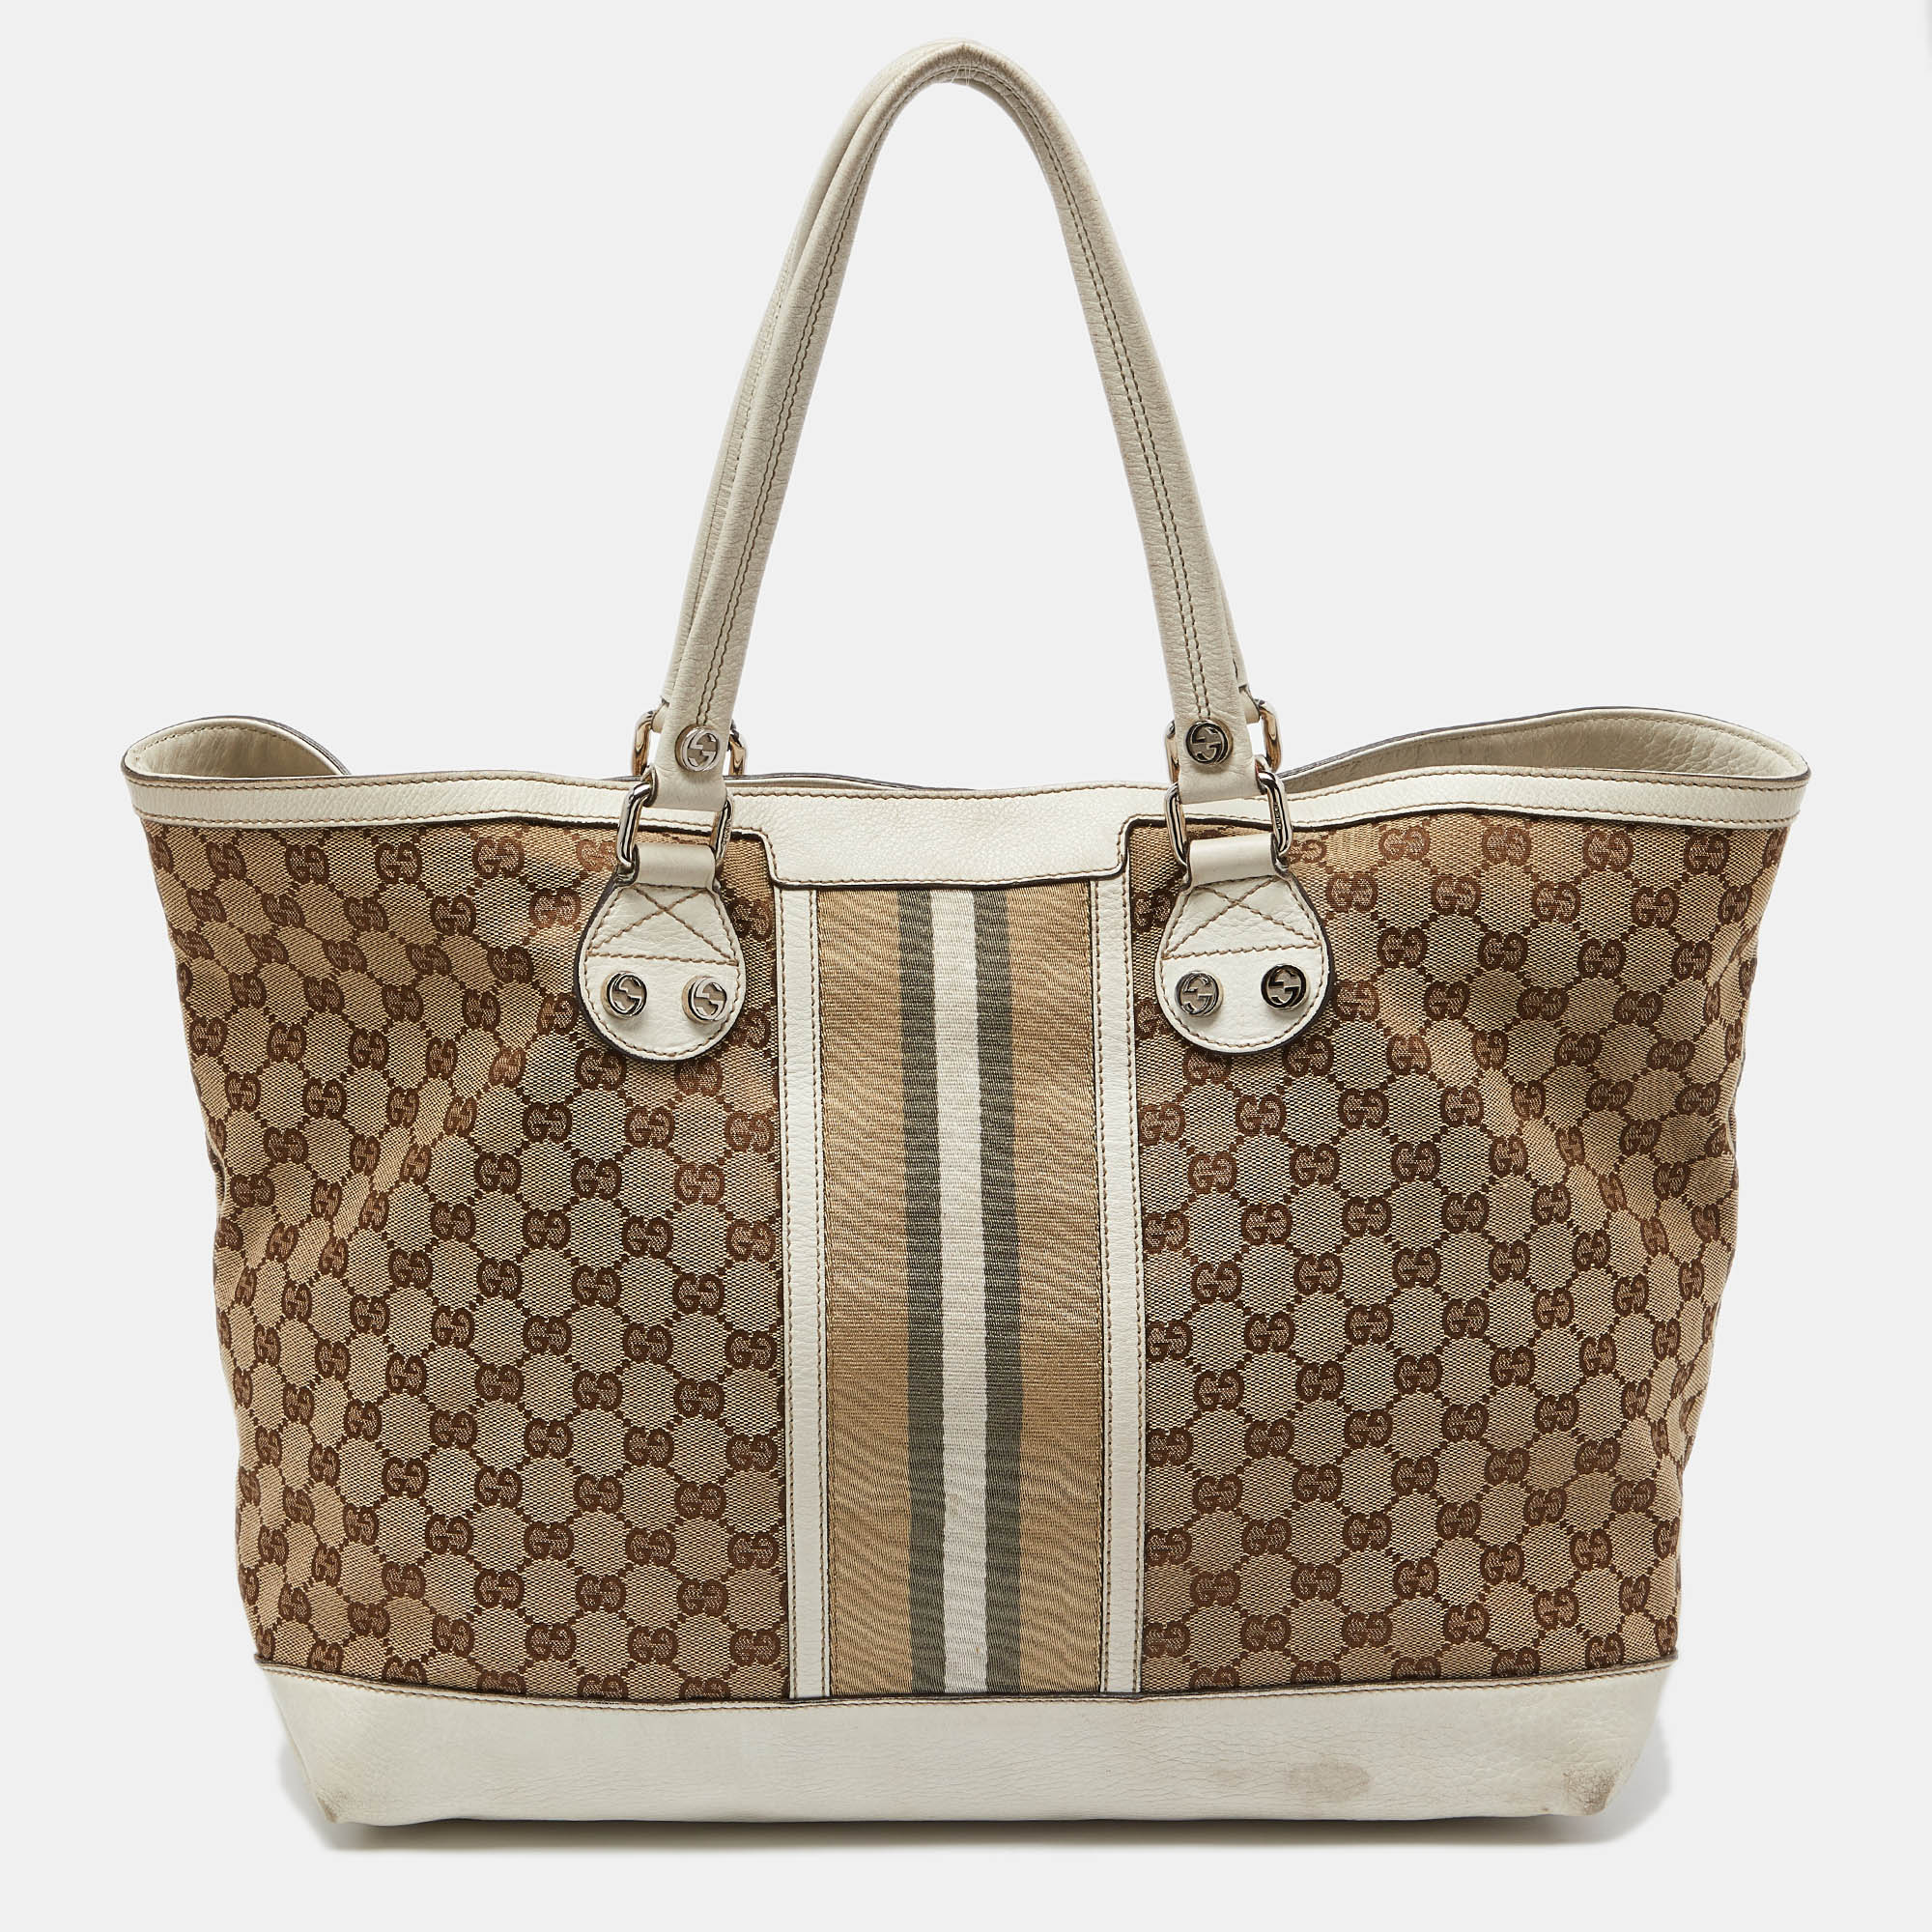 Gucci beige/off white gg canvas and leather web sunset shopper tote